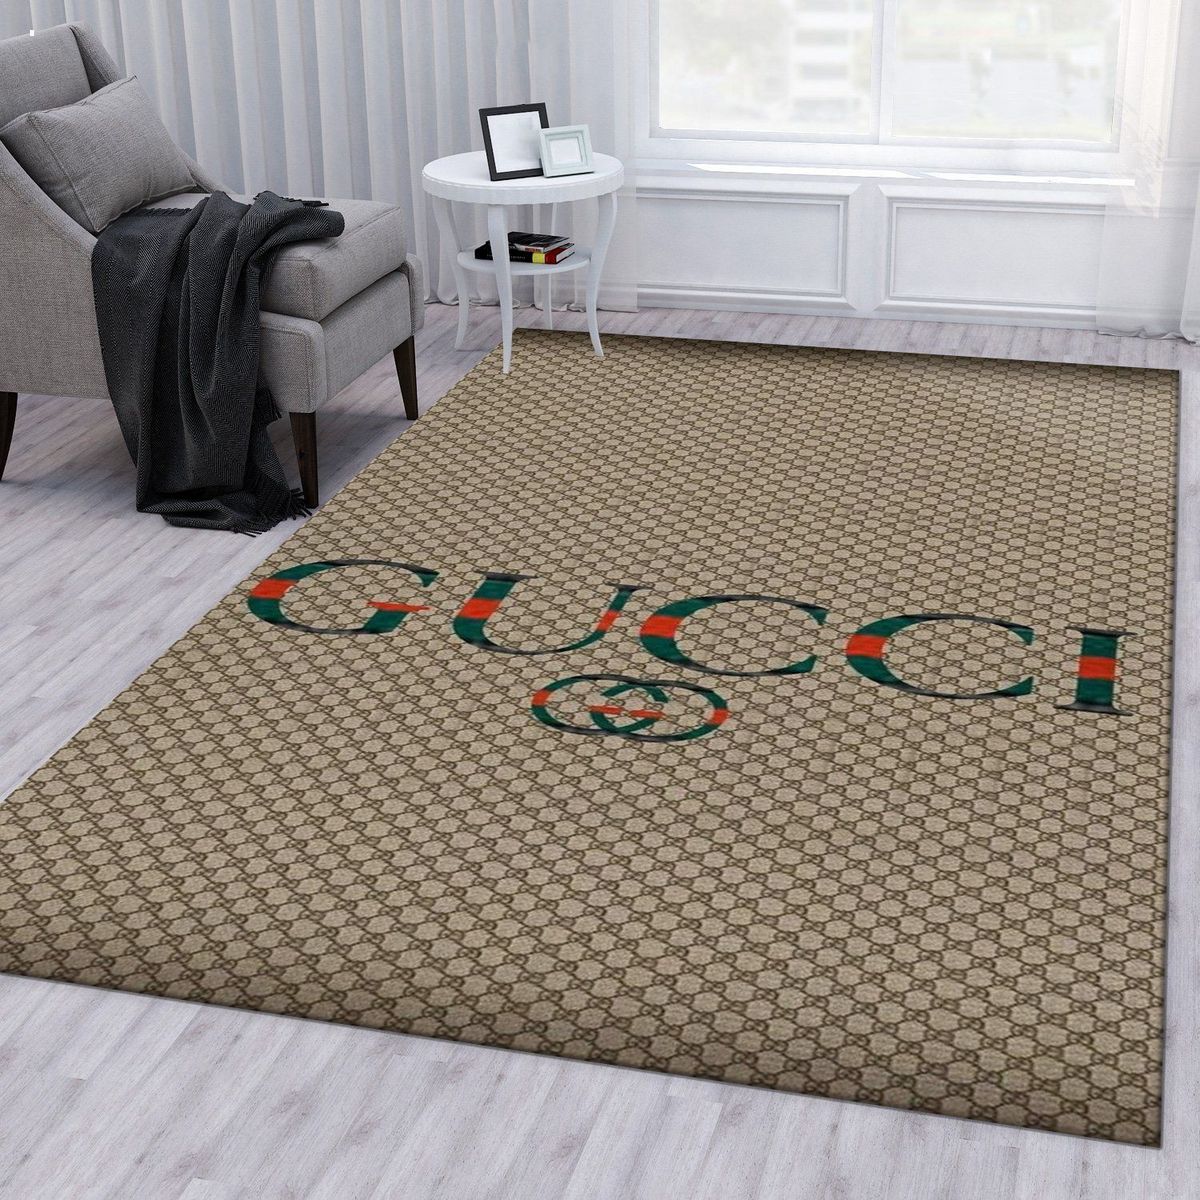 NEW Gucci Full Printing Pattern Luxury Brand Carpet Rug Limited Edition